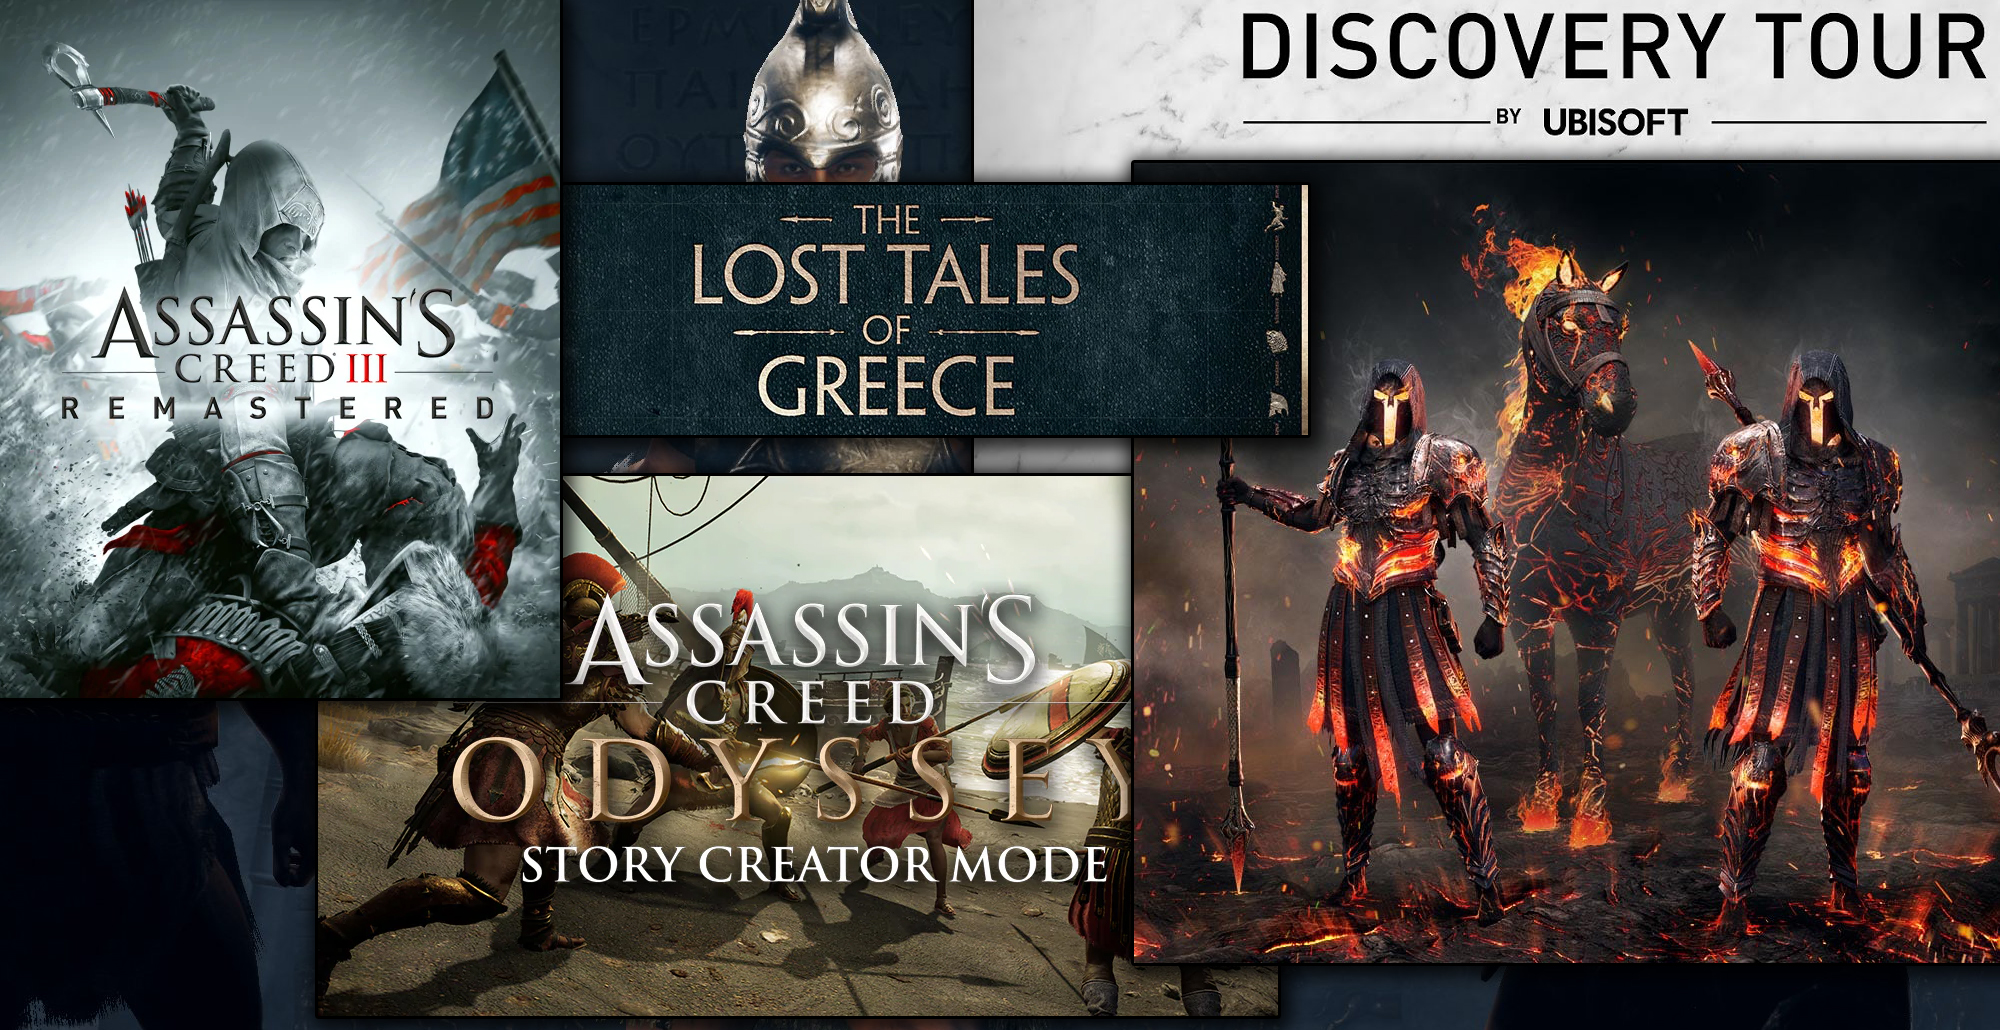 CODEX on X: Ubisoft has just announced that #AssassinsCreed III Remastered  is coming soon and will be part of the Assassin's Creed Odyssey season  pass. Take a look at the official box